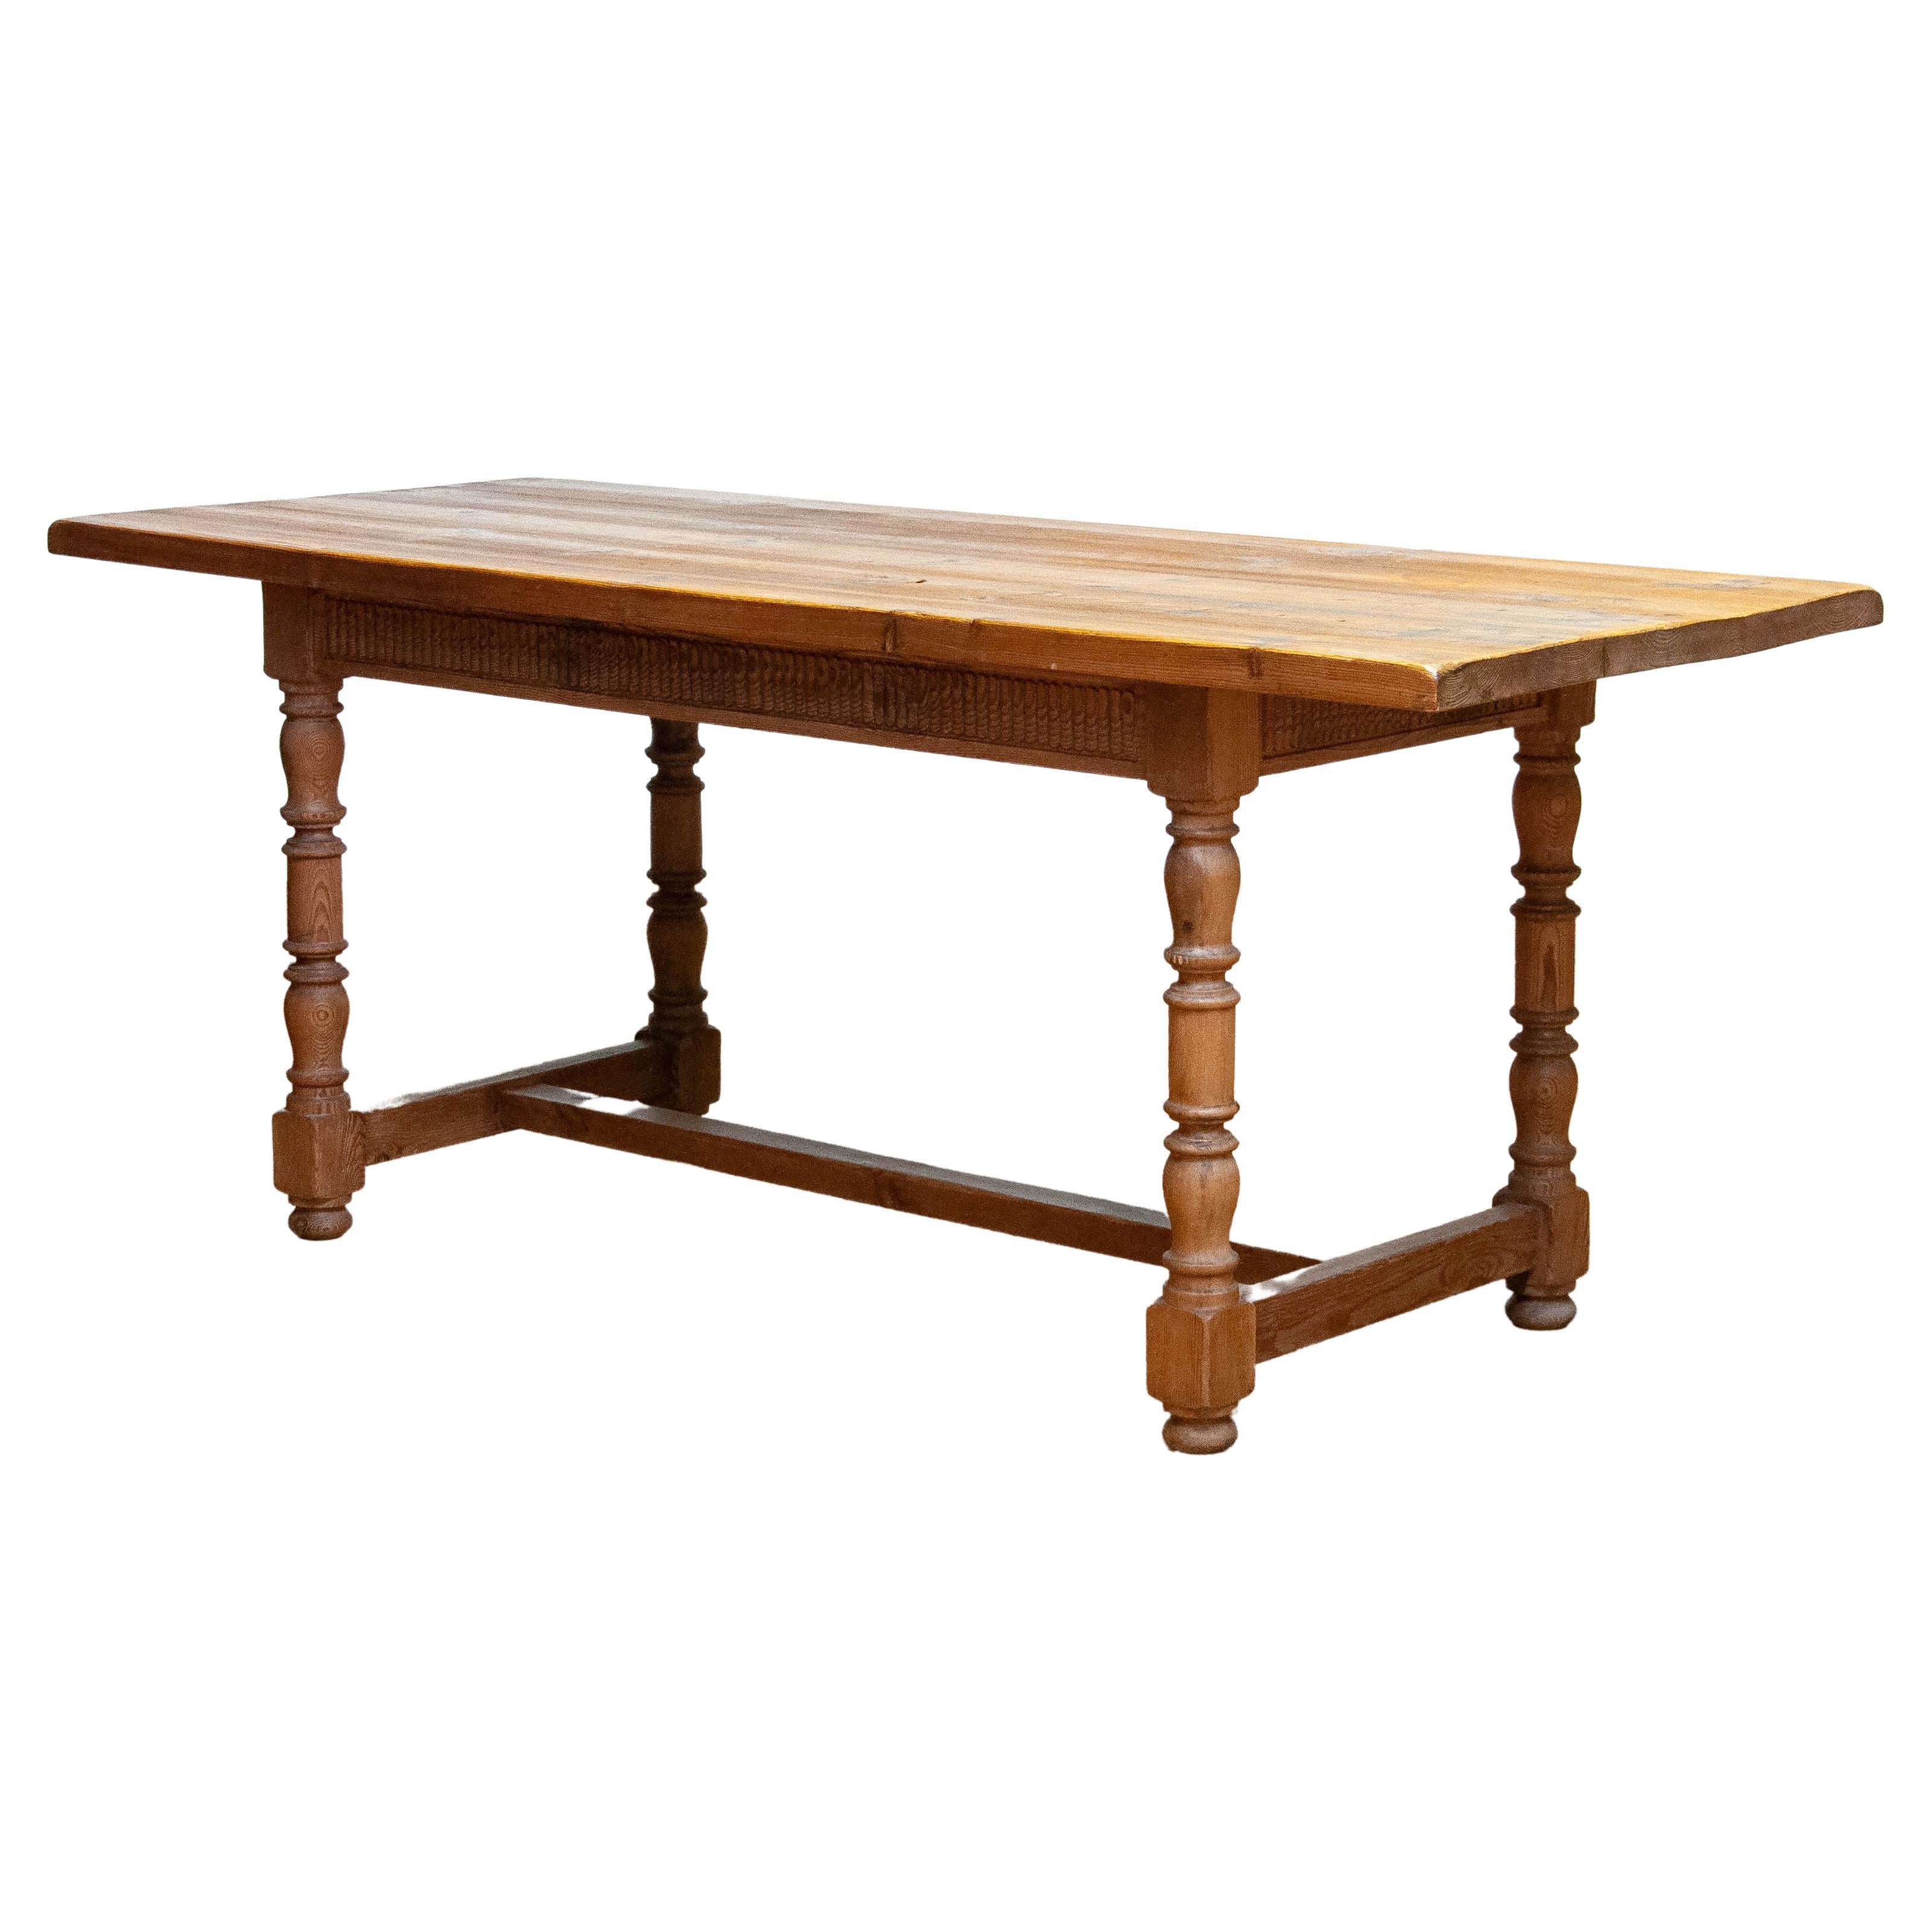 Late 19th Century Antique Swedish Folk Art Farm Country Dining Table In Pine For Sale